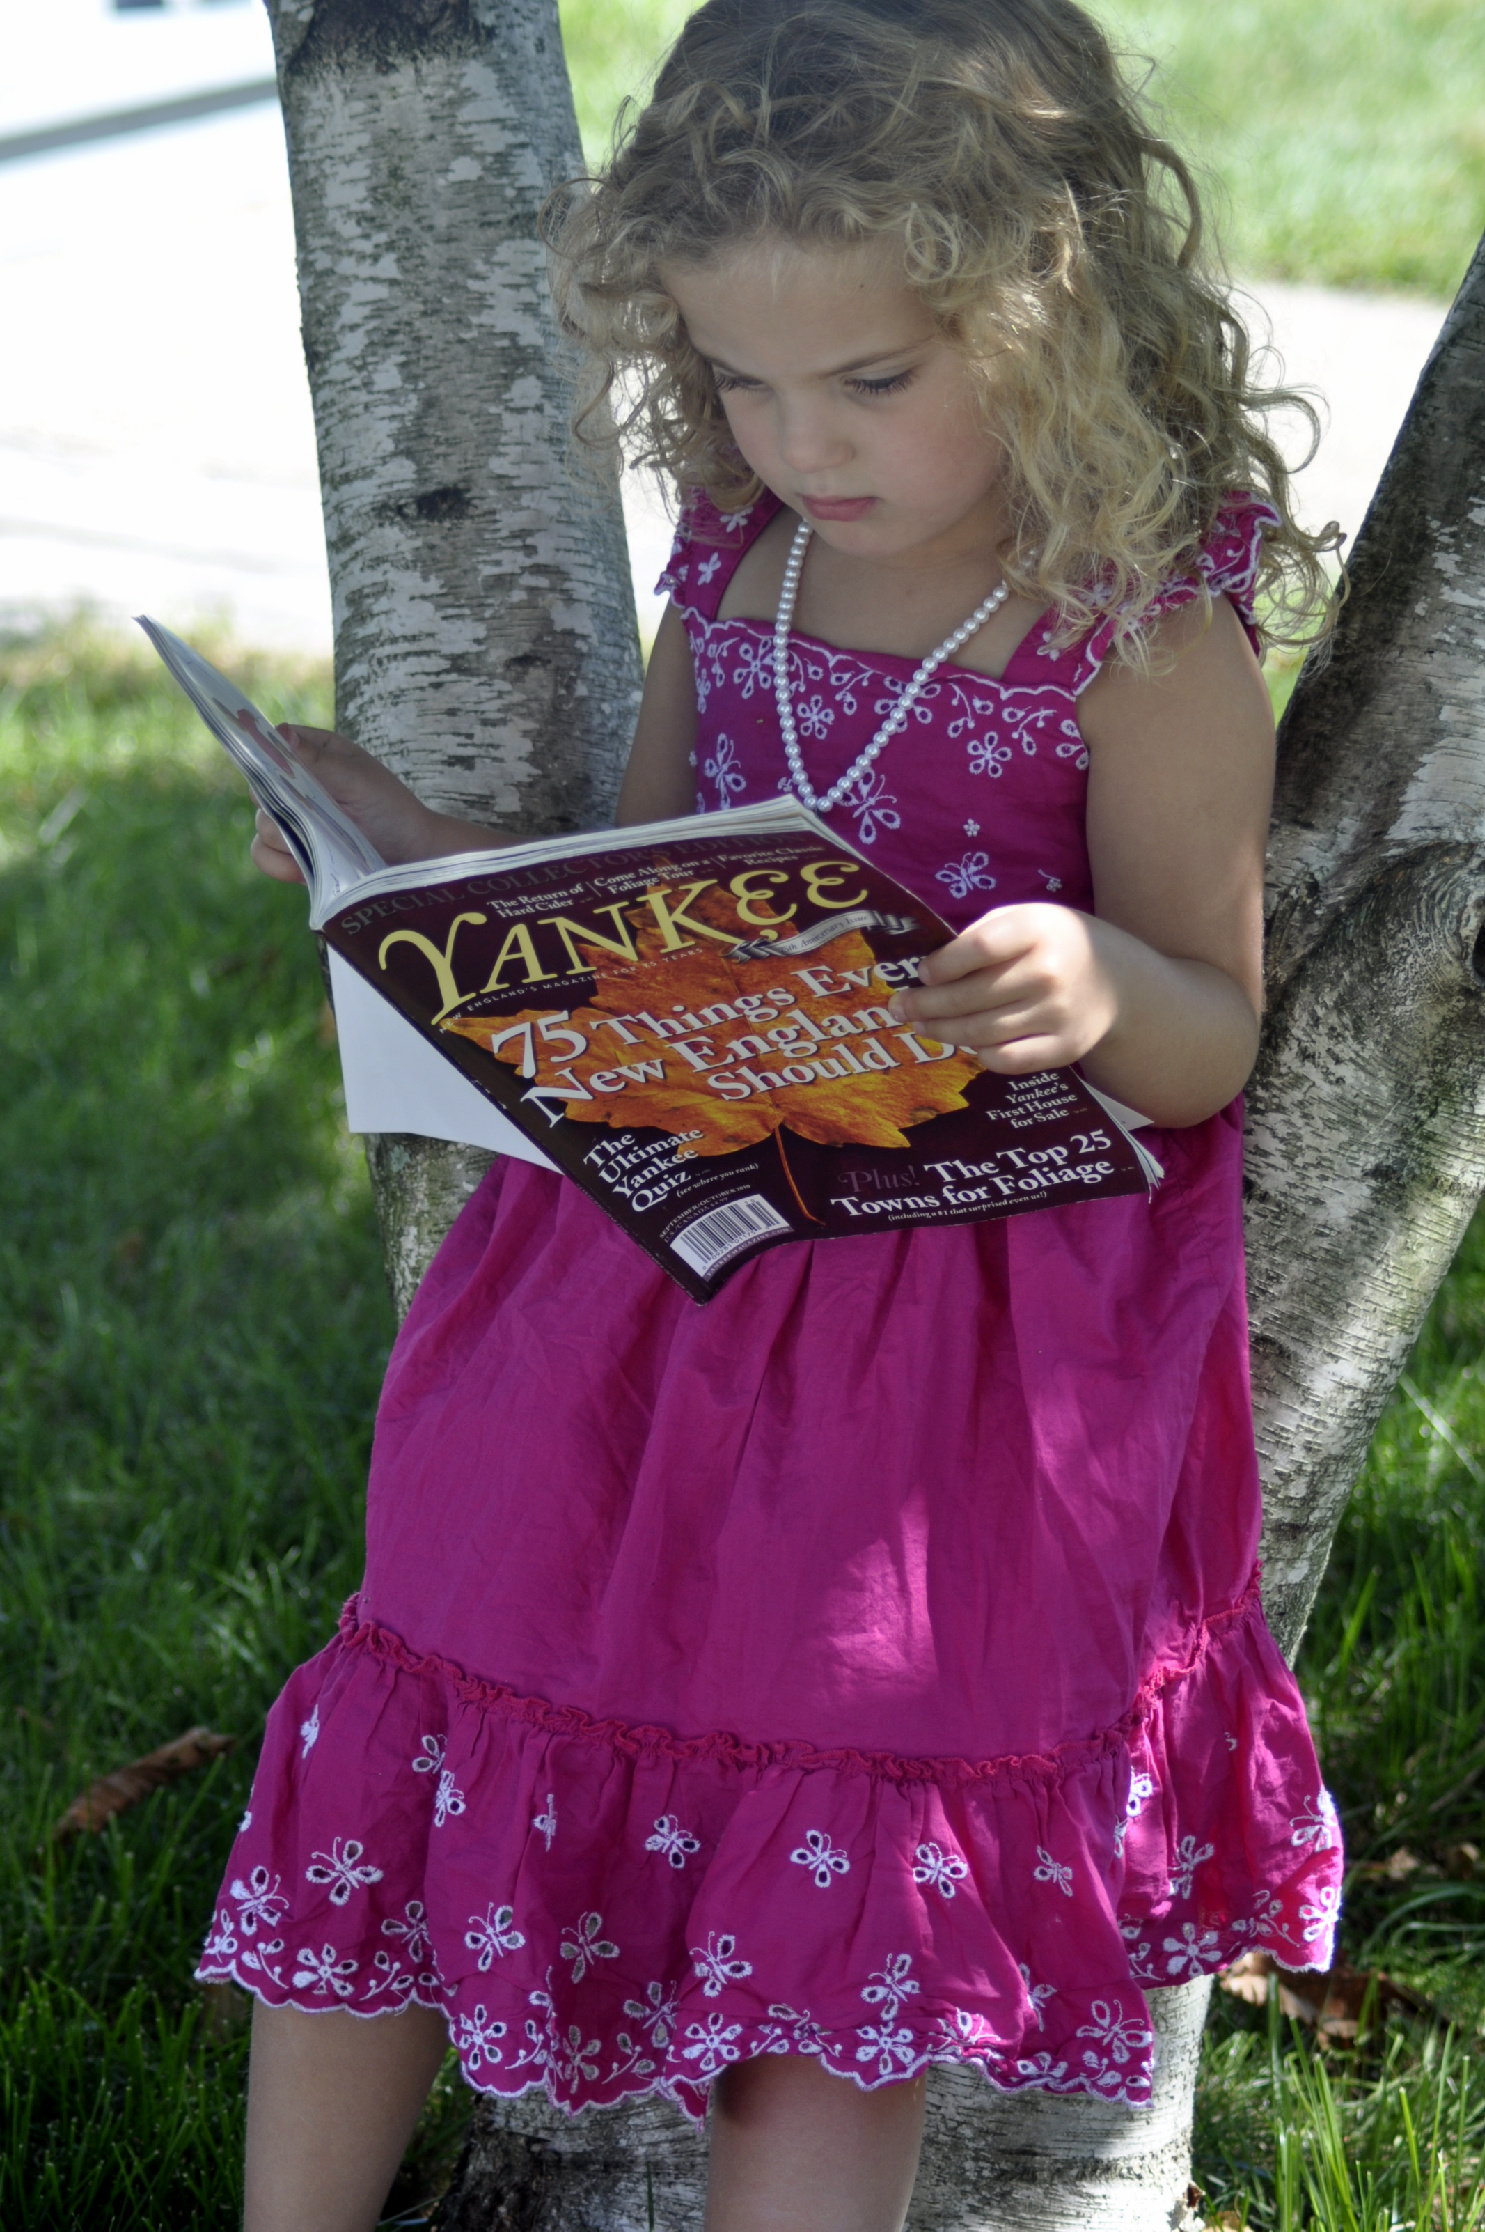 Little Girl Reading Yankee (user submitted)